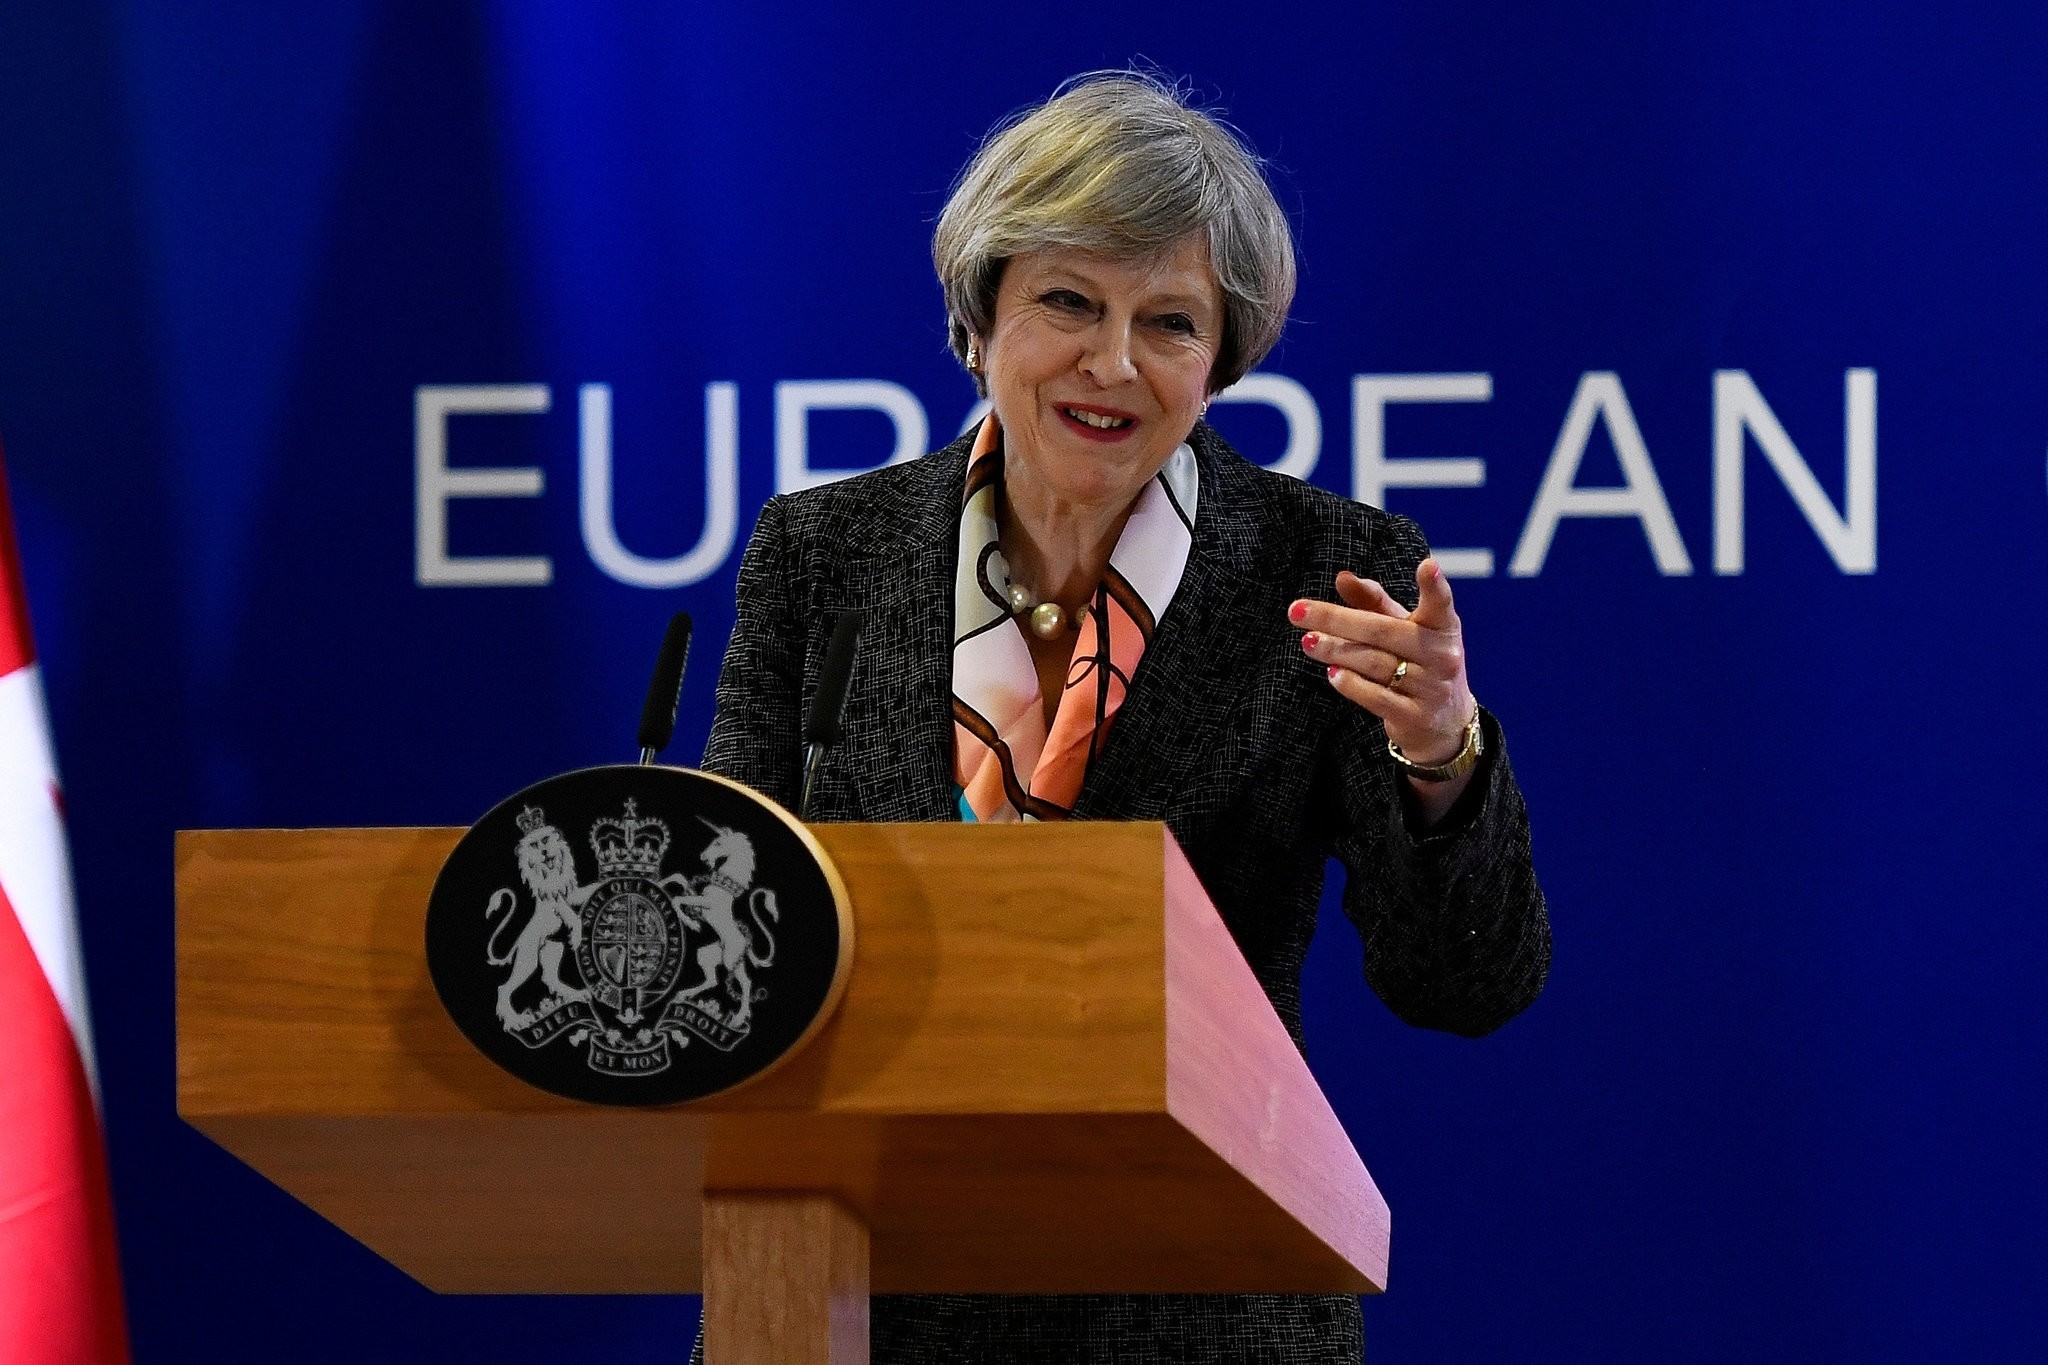 Britain's Prime Minister Theresa May attends a news conference during the EU Summit in Brussels, Belgium, March 9, 2017. (REUTERS Photo)